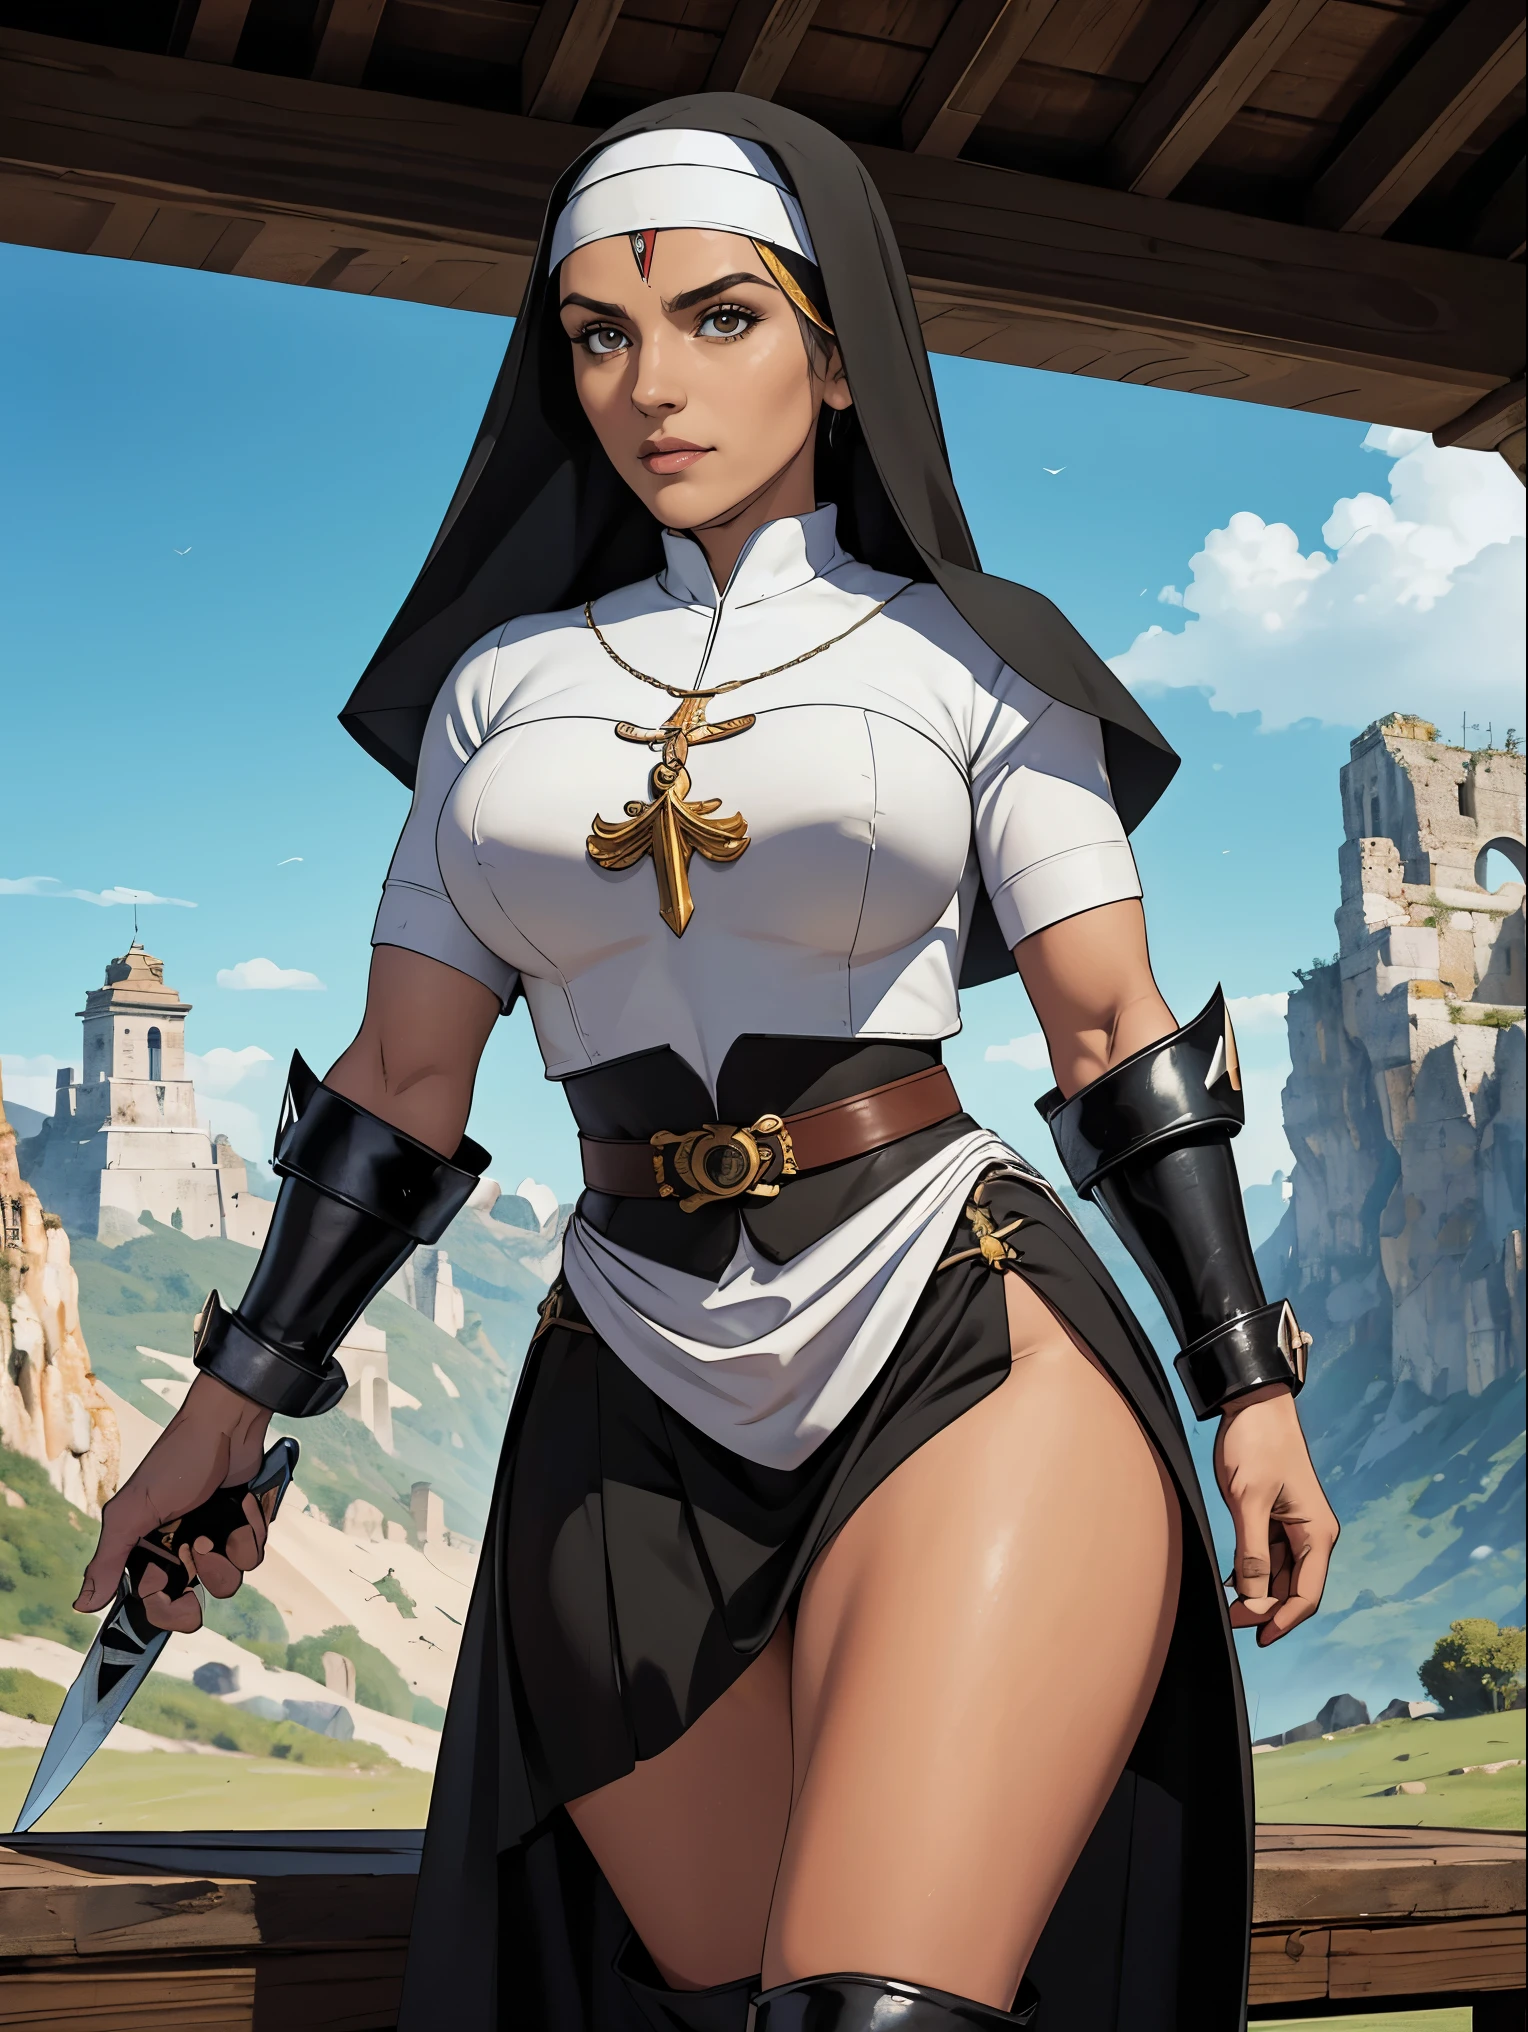 (work of art, Maximum quality, best qualityer, offcial art, beautiful and aesthetic:1.2), (1 girl:1.3), ((sharp facial features, sharp features, Hawkish features)), ((blue colored eyes)), Busty brunette girl knight paladin, extremely detaild, portraite, gazing at viewer, standing alone, (whole body:0.6), detailed fund, full body shot shot, (warm mountain meadow theme:1.1), Holy knight, (nun), charlatan, pretentious smile, uncanny, Swinging in the mountains, armors, polished metal, gold trim, long boots, White tissue, pelvic curtain, mantea, light leather, ((((nun, longsword, heavy armors, armorsed, Legs long, pelvic curtain, toned, muscular)))), Waist slender, Slim Hips, Legs long, Mediovale (mountain exterior:1.1) fund, dark uncanny lighting, eyeshadows, magical atmosphere, Dutch angle